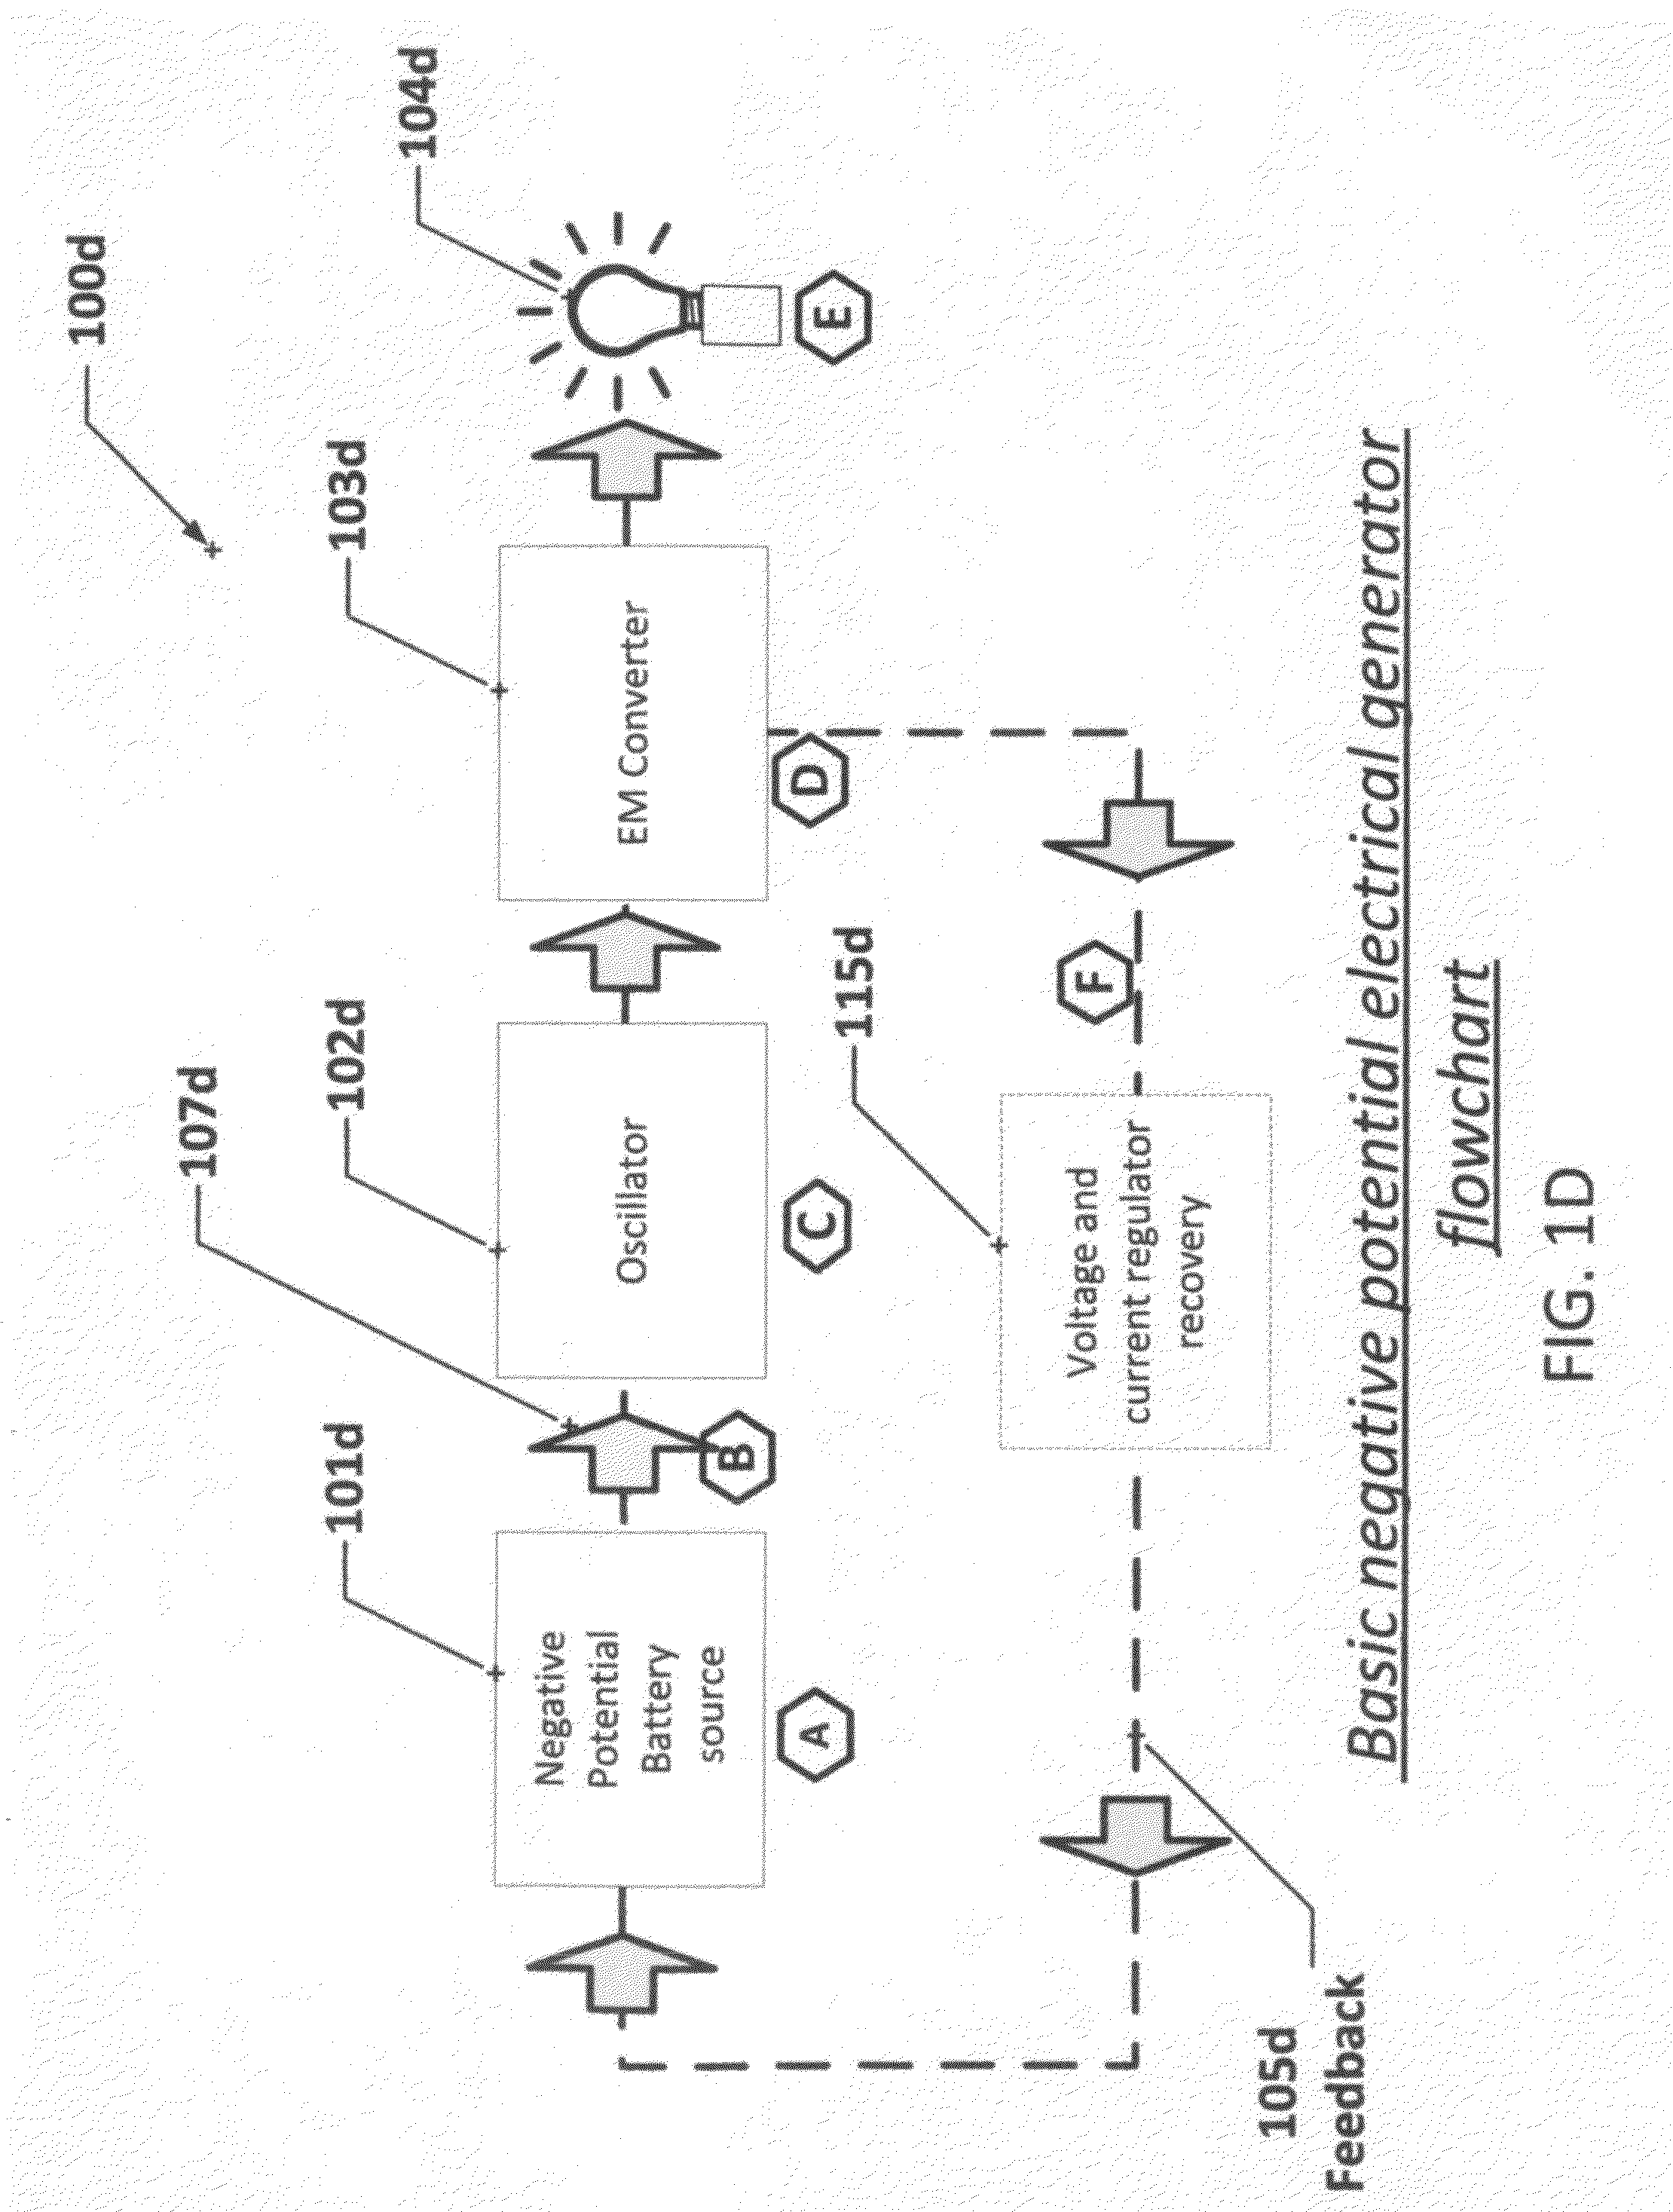 Negentropic method and apparatus to generate usable work while reconditioning the energy source using electromagnetic energy waves